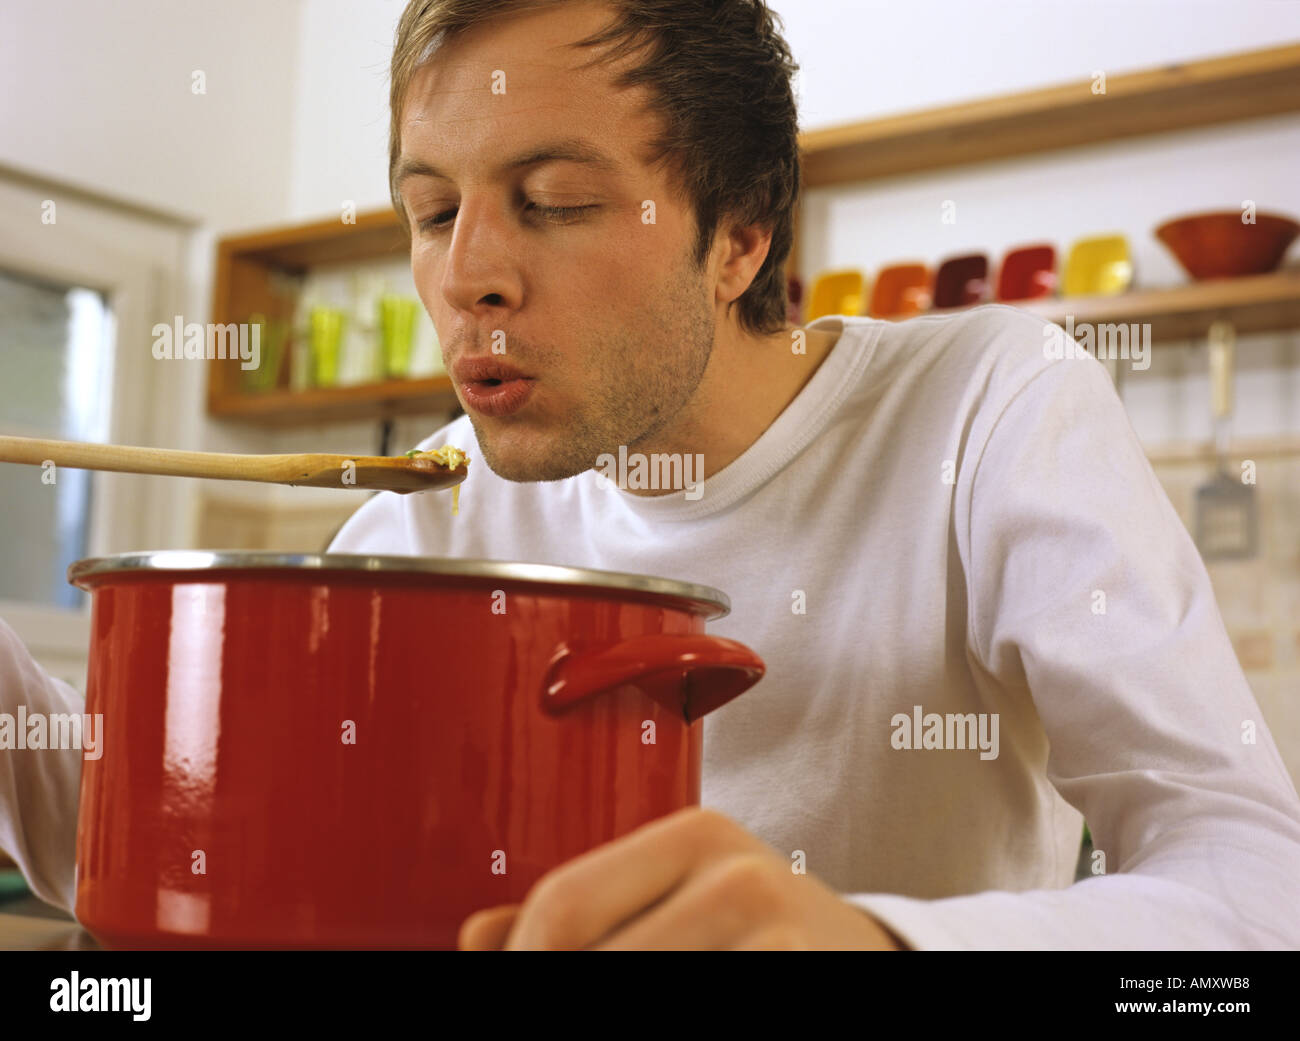 youngman cooking Stock Photo